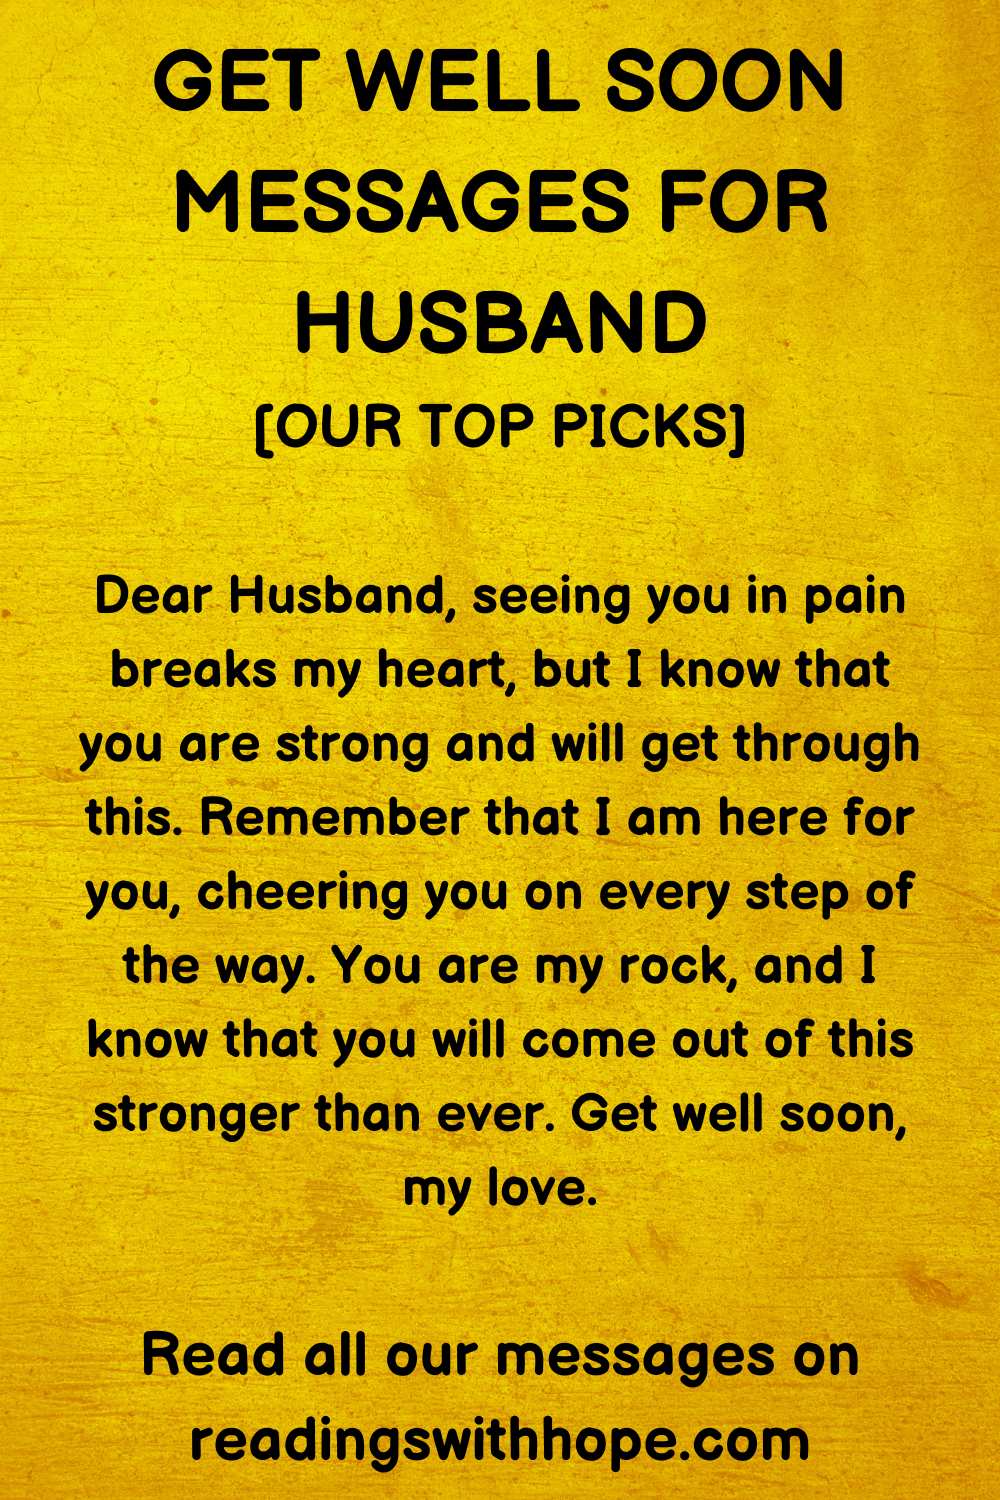 Get Well Soon Message for Husband
